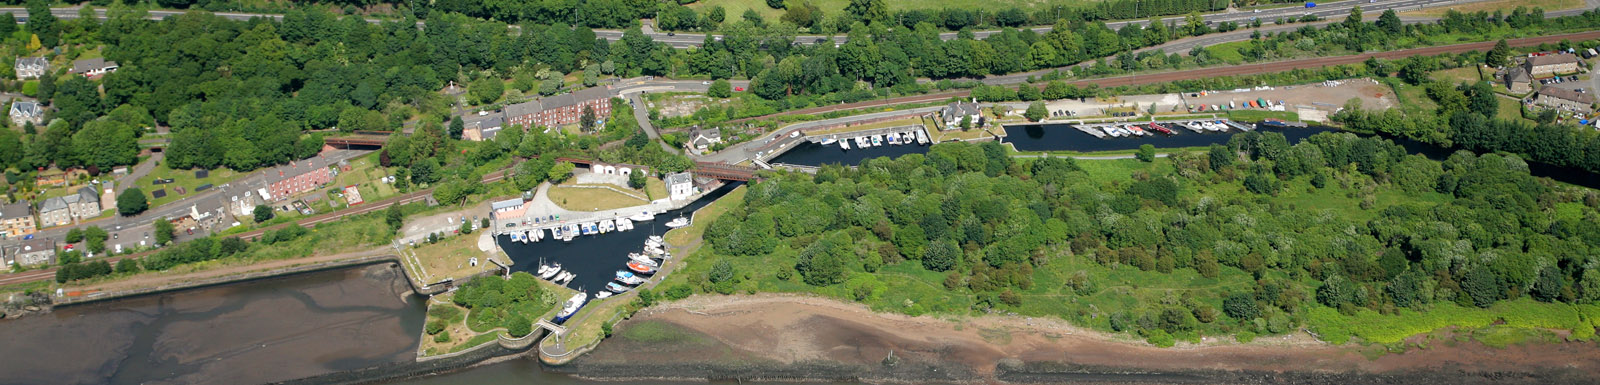 Bowling Harbour and the Forth & Clyde canal from the air